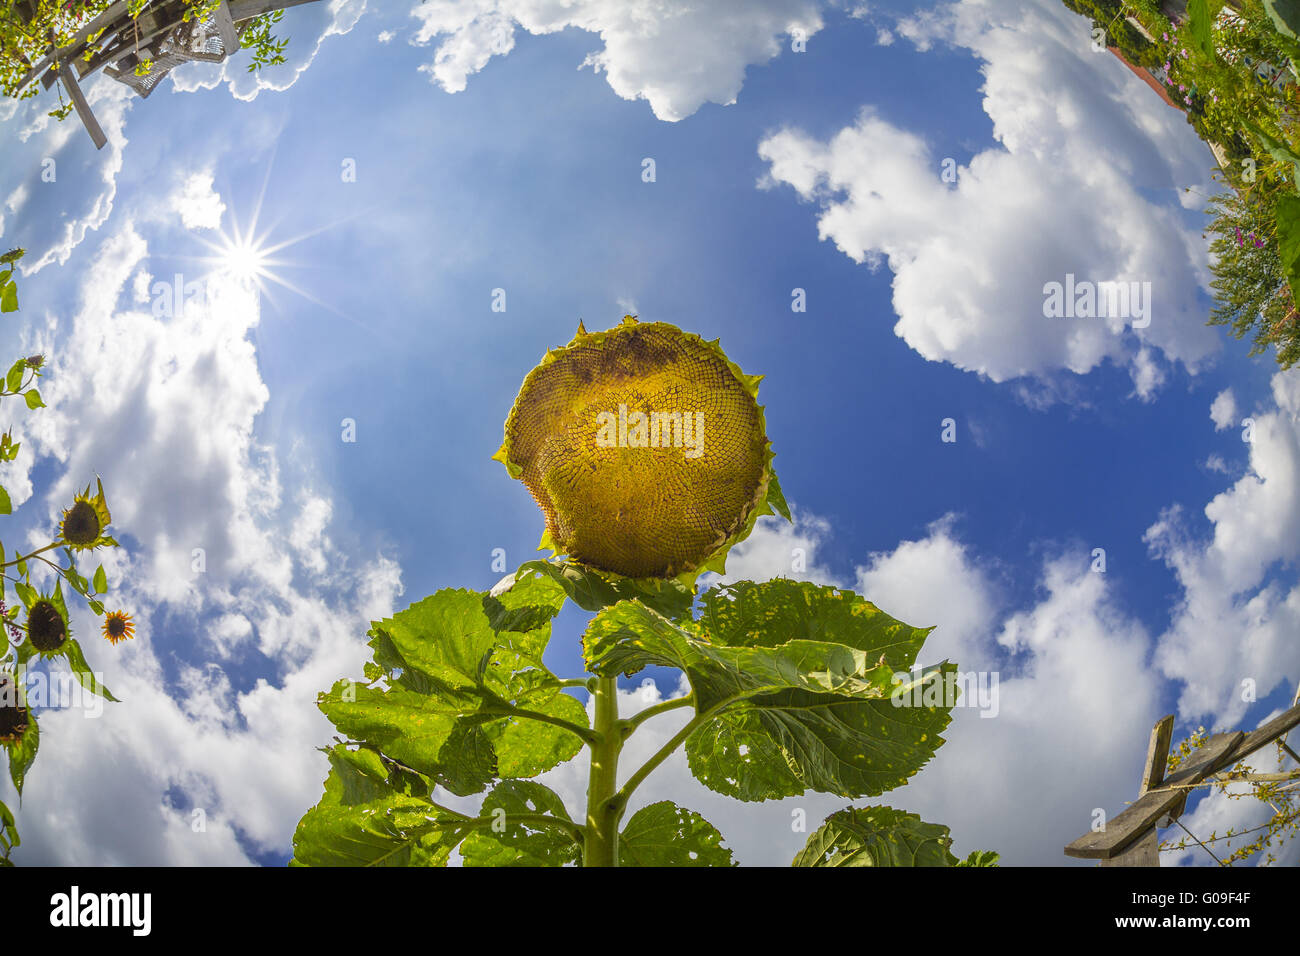 old sunflower in a garden, shoot with a fish eye Stock Photo